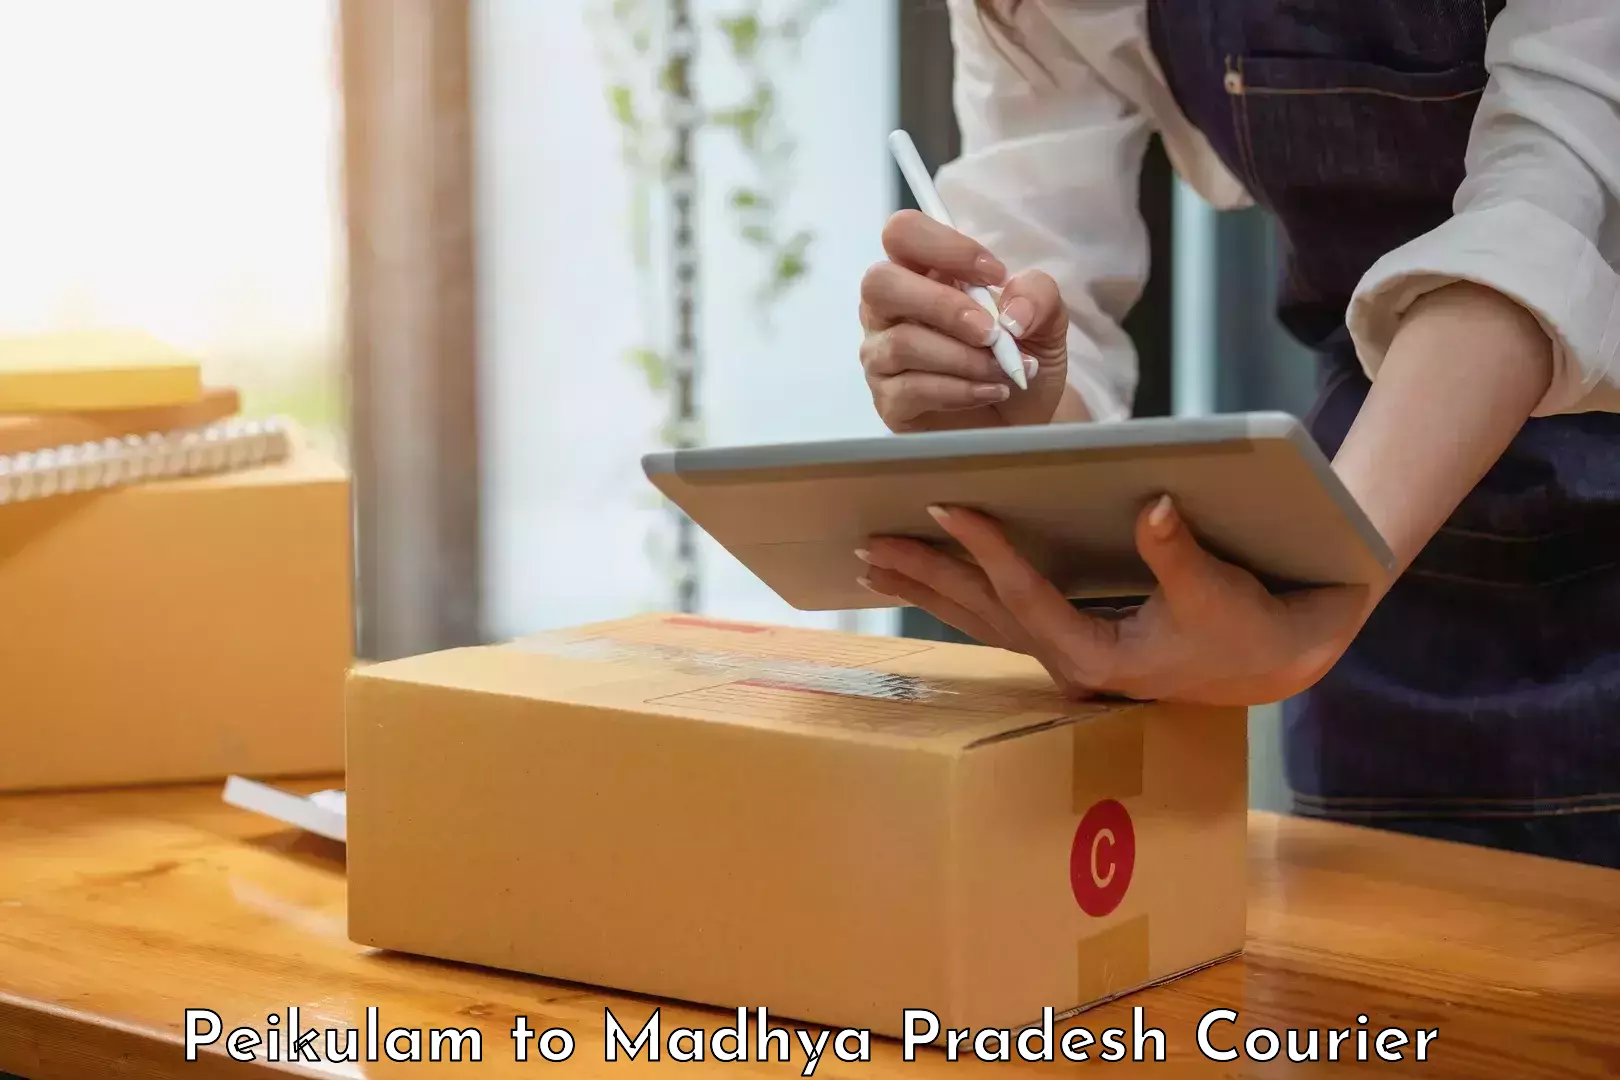 Expedited parcel delivery Peikulam to Maksudangarh